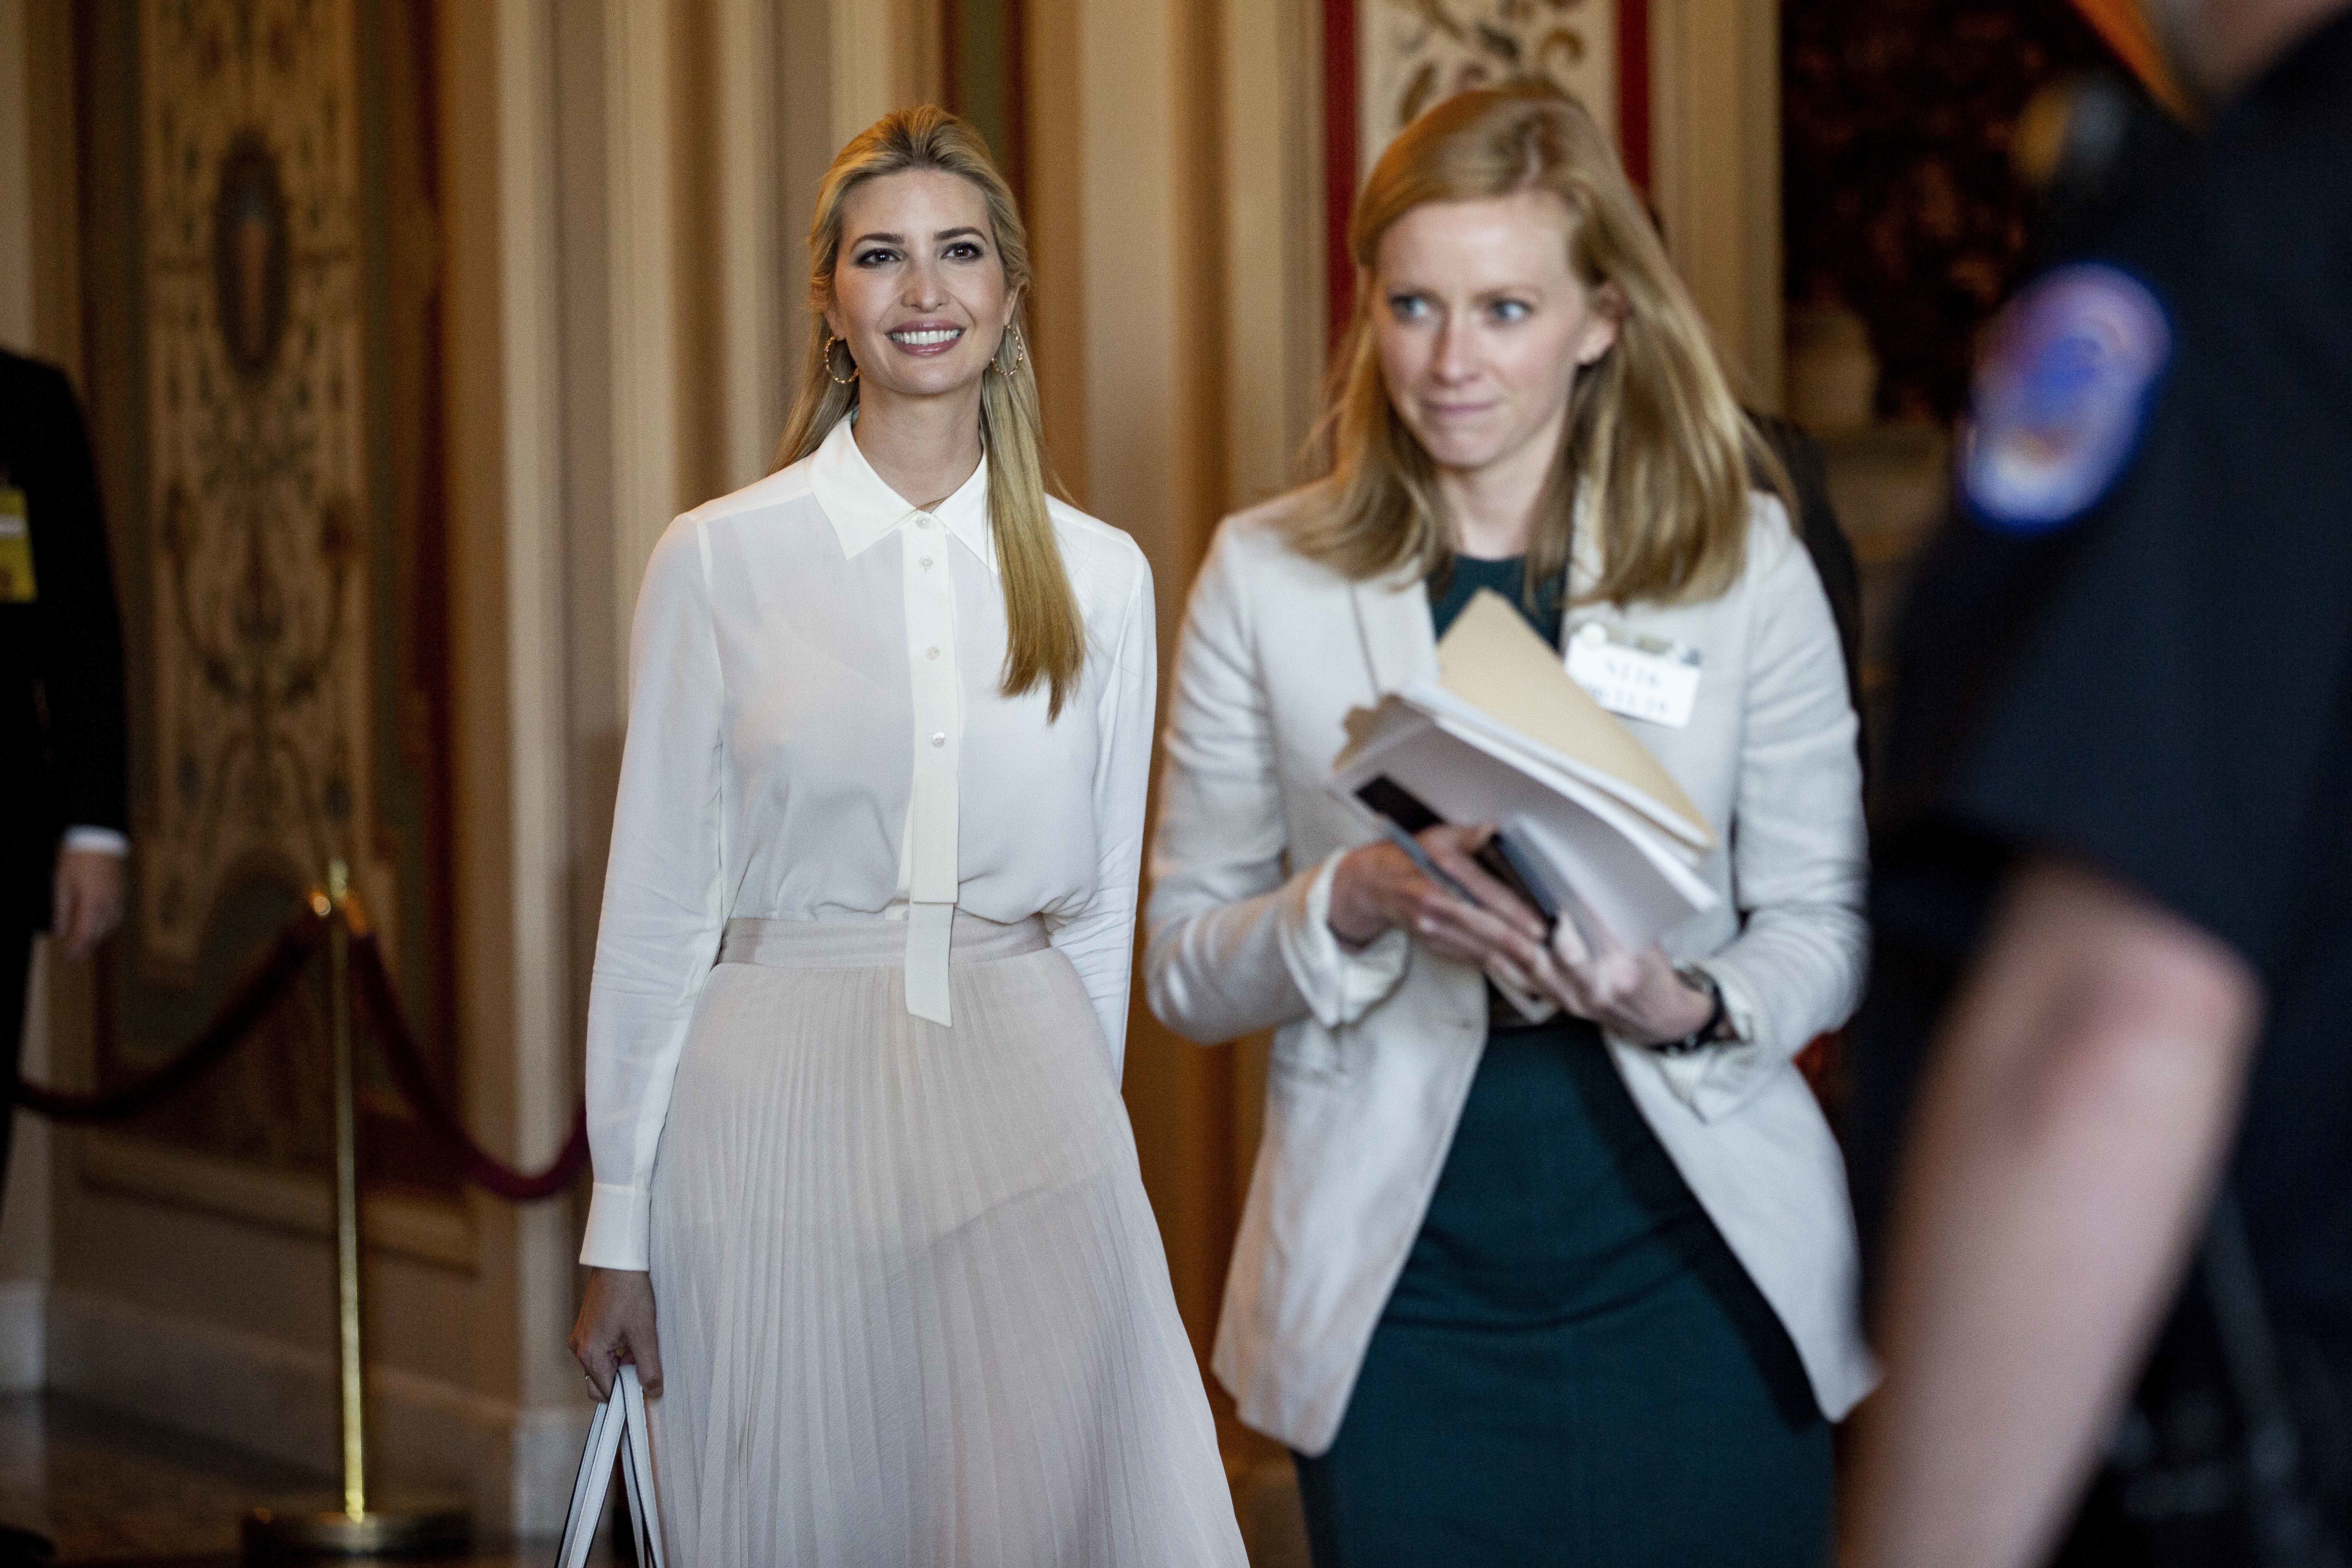 Ivanka Trump attends a meeting in Washington in June 2018 | Photo: Getty Images